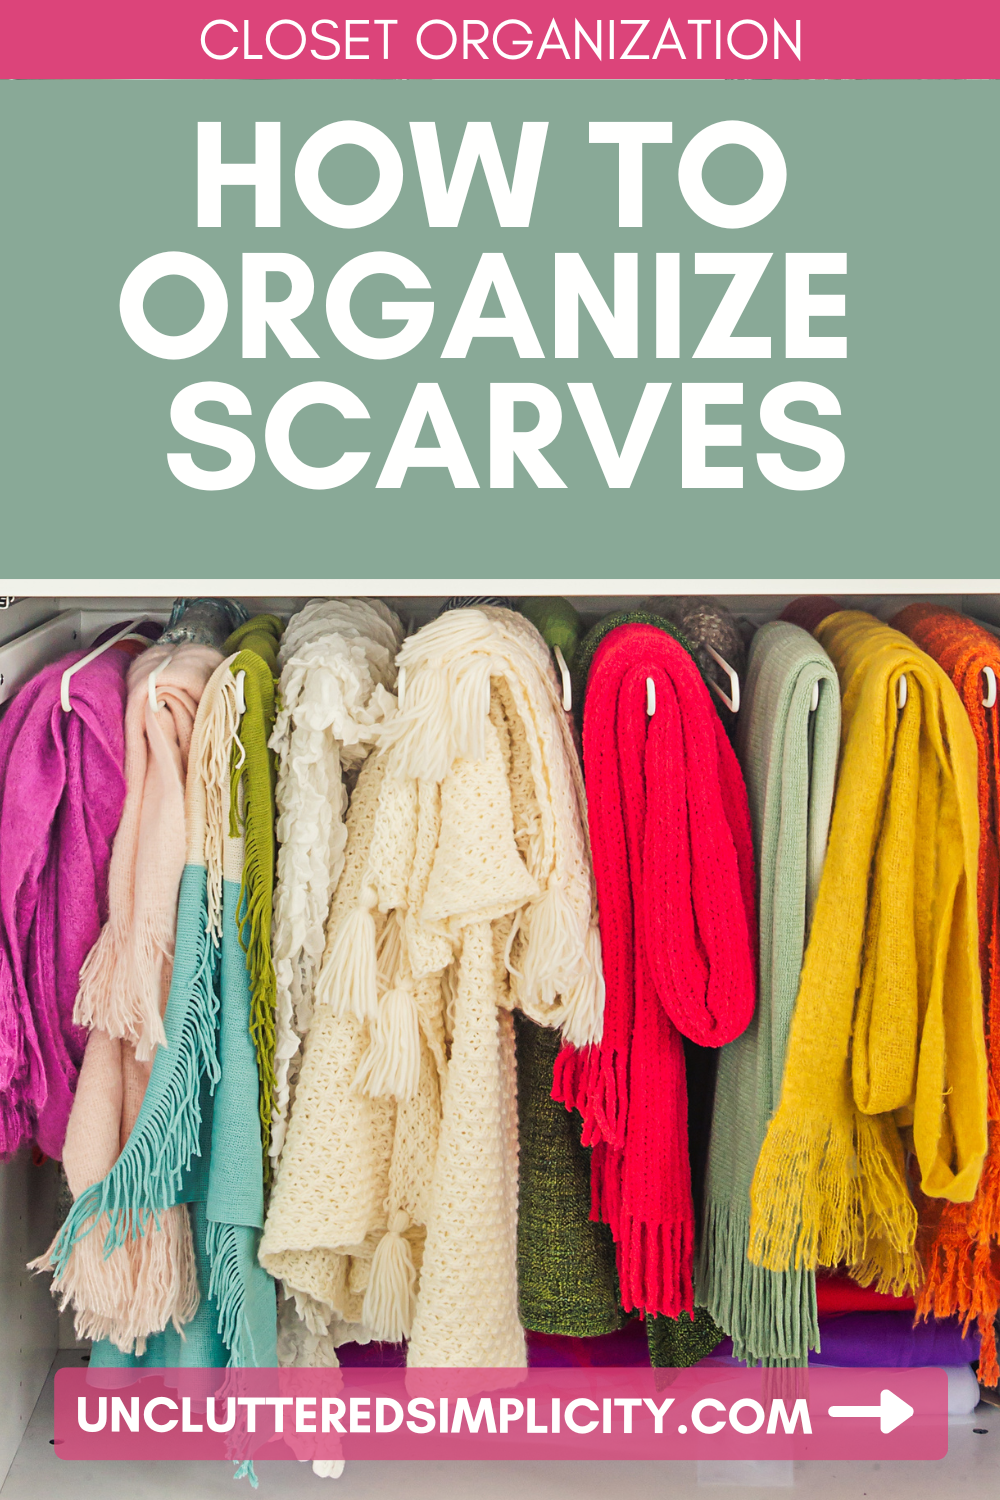 Pin how to organize scarves